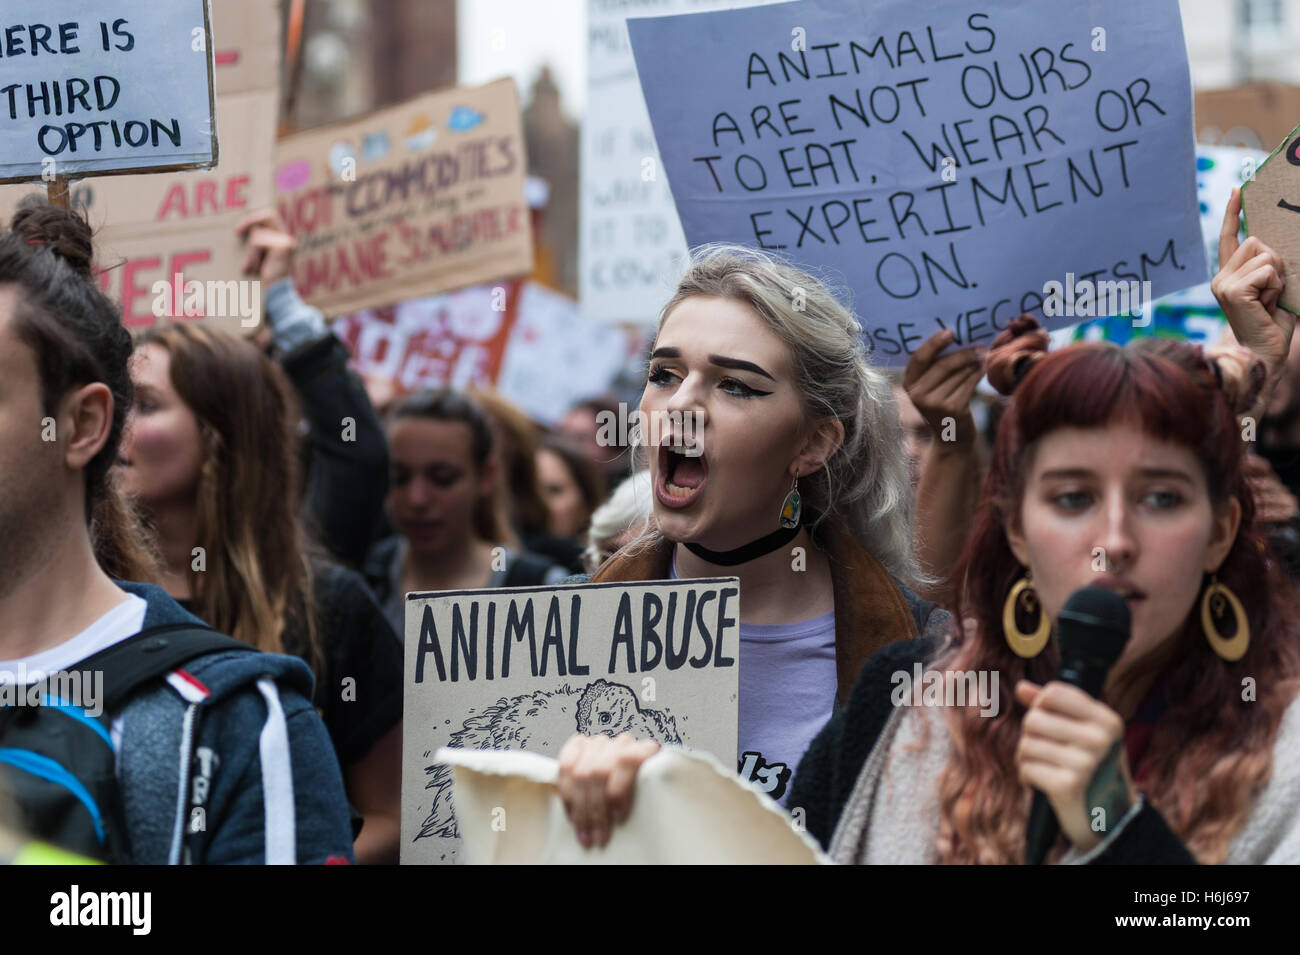 London, UK. 29th October 2016. Hundreds of activists and campaigners took part in 'The Official Animal Rights March' in Central London. The protesters demanded complete abolition of animal exploitation and end to oppression and mistreatment of animals for human benefit. Participants promoted veganism as one of the means for creating a better world for the animals. Wiktor Szymanowicz/Alamy Live News Stock Photo